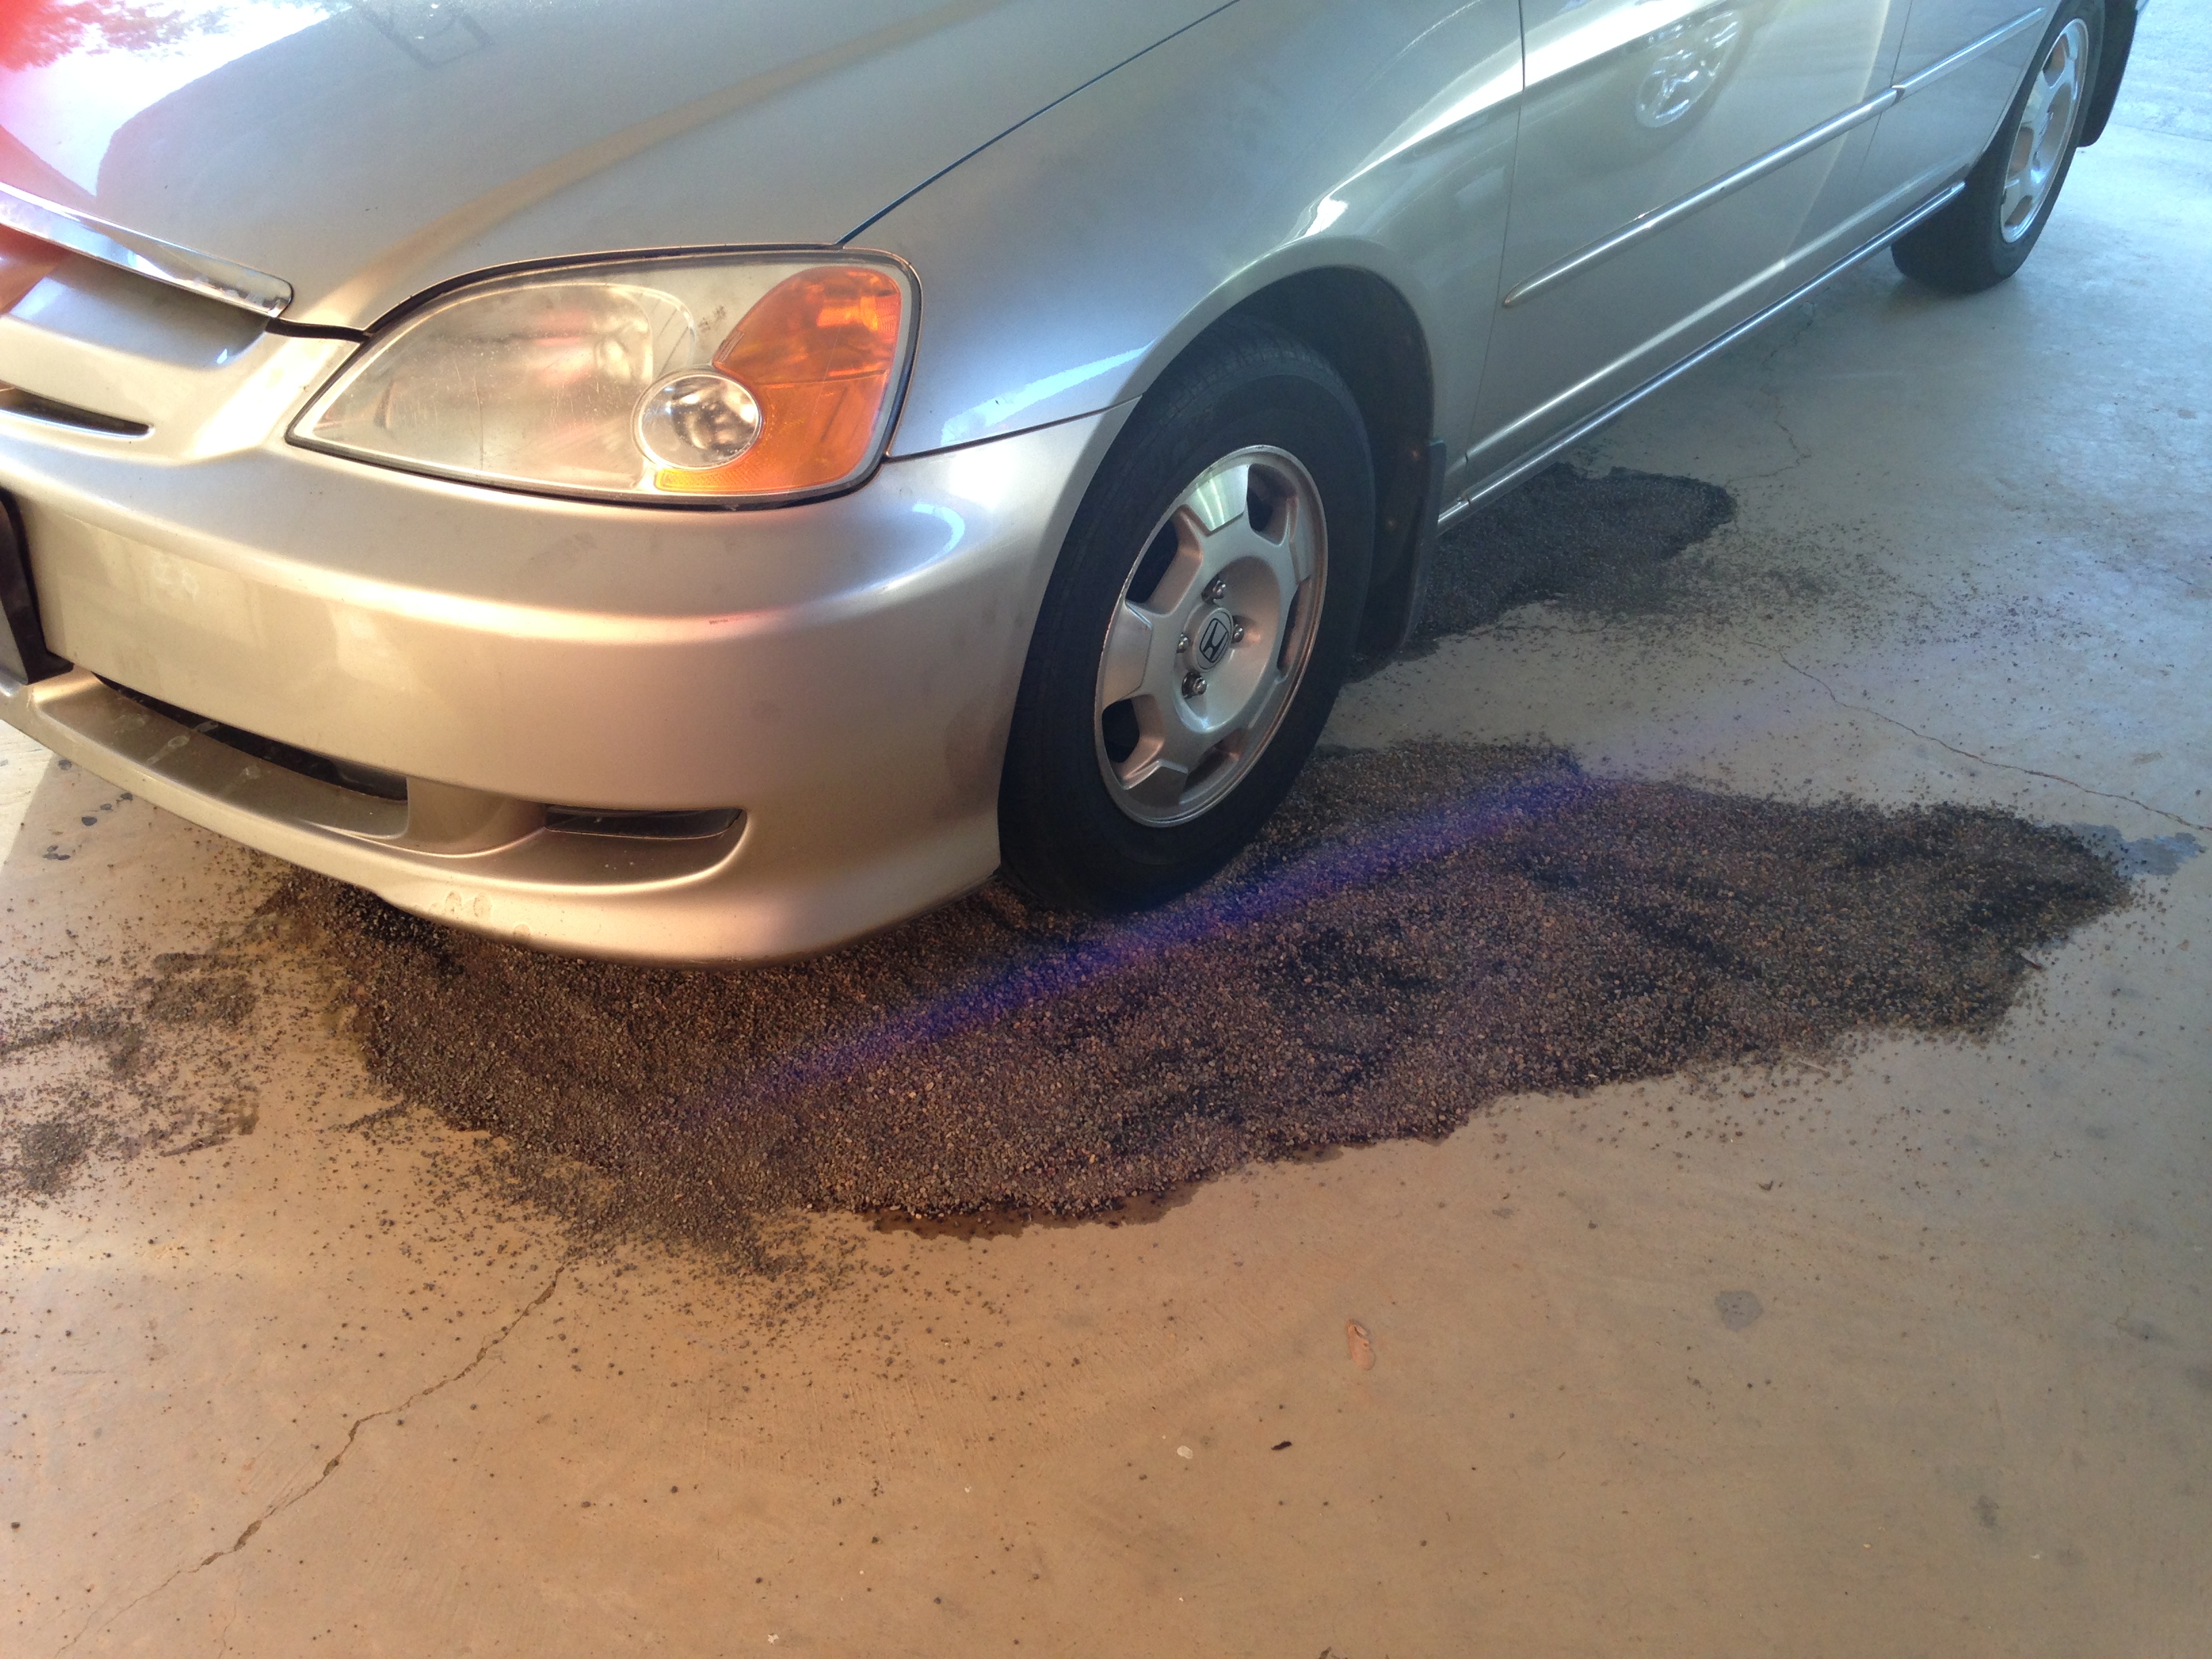 This is the transmission fluid that came out of the car and stained our concret driveway.